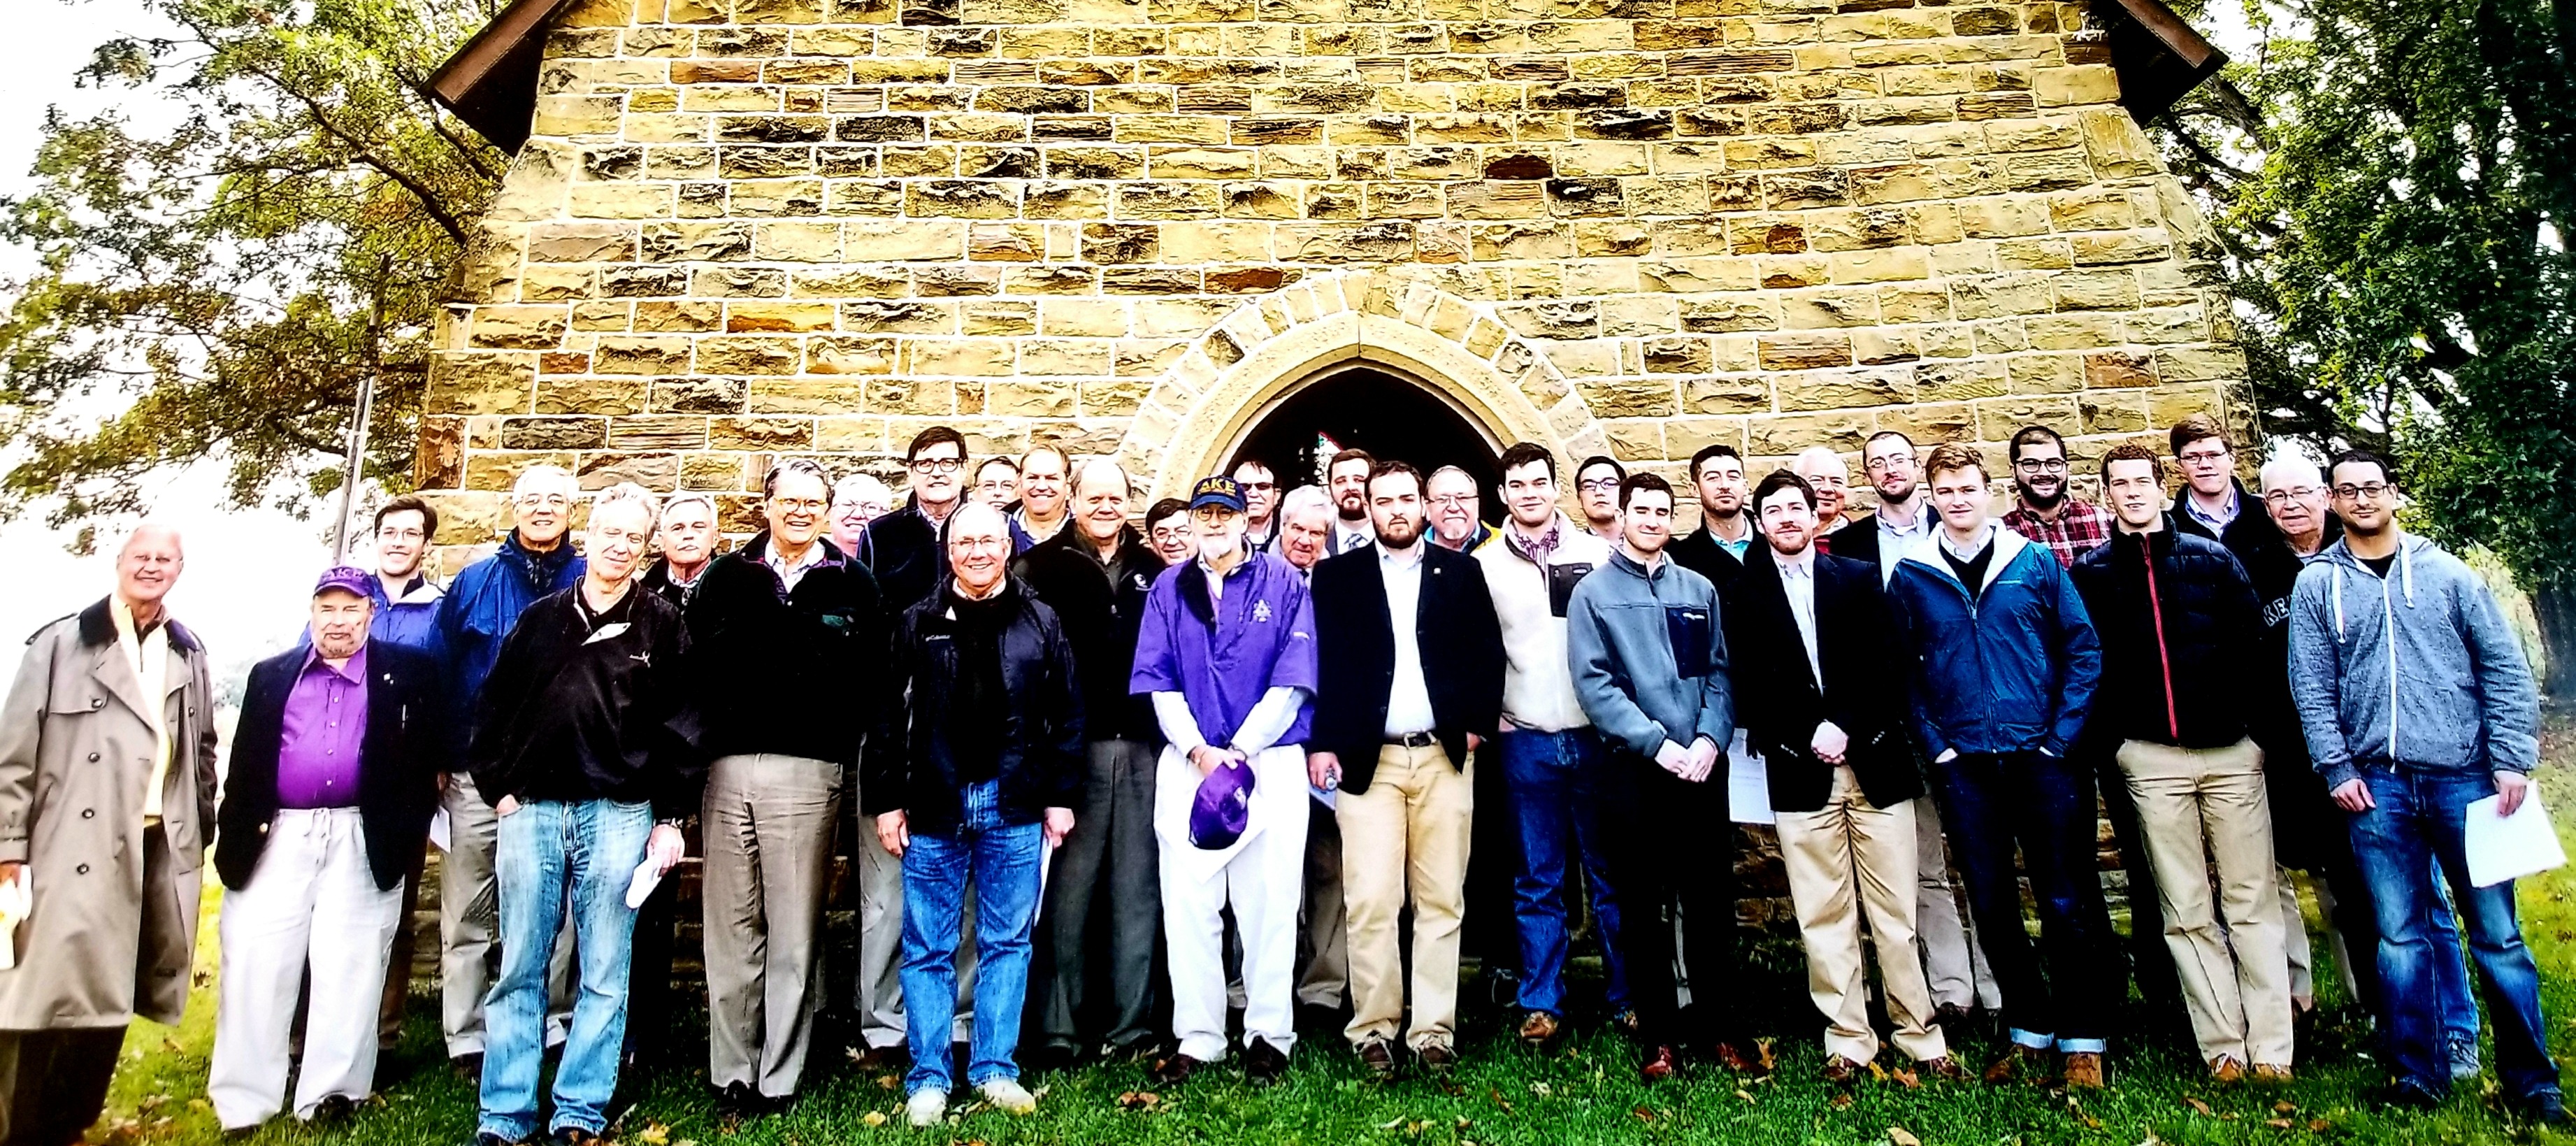 Deke Alumni at the Quarry Chapel for a Memorial Service for Brothers who passed – October, 2014.